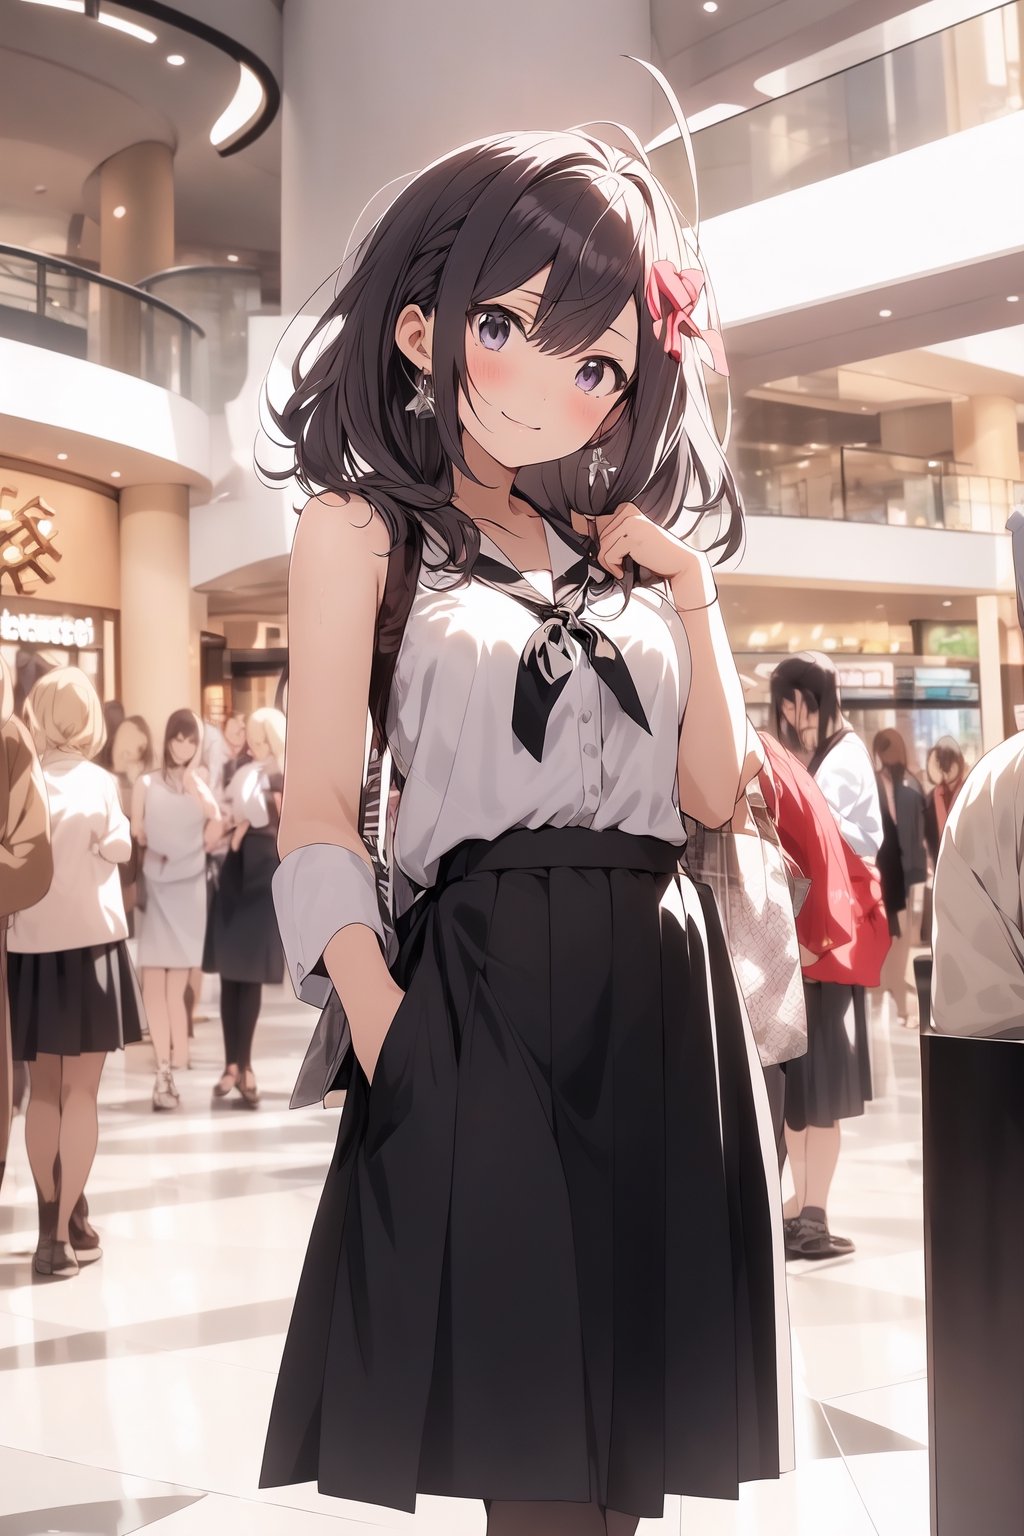 A beautiful anime girl is standing in a mall, she has a ribbon and a long skirt